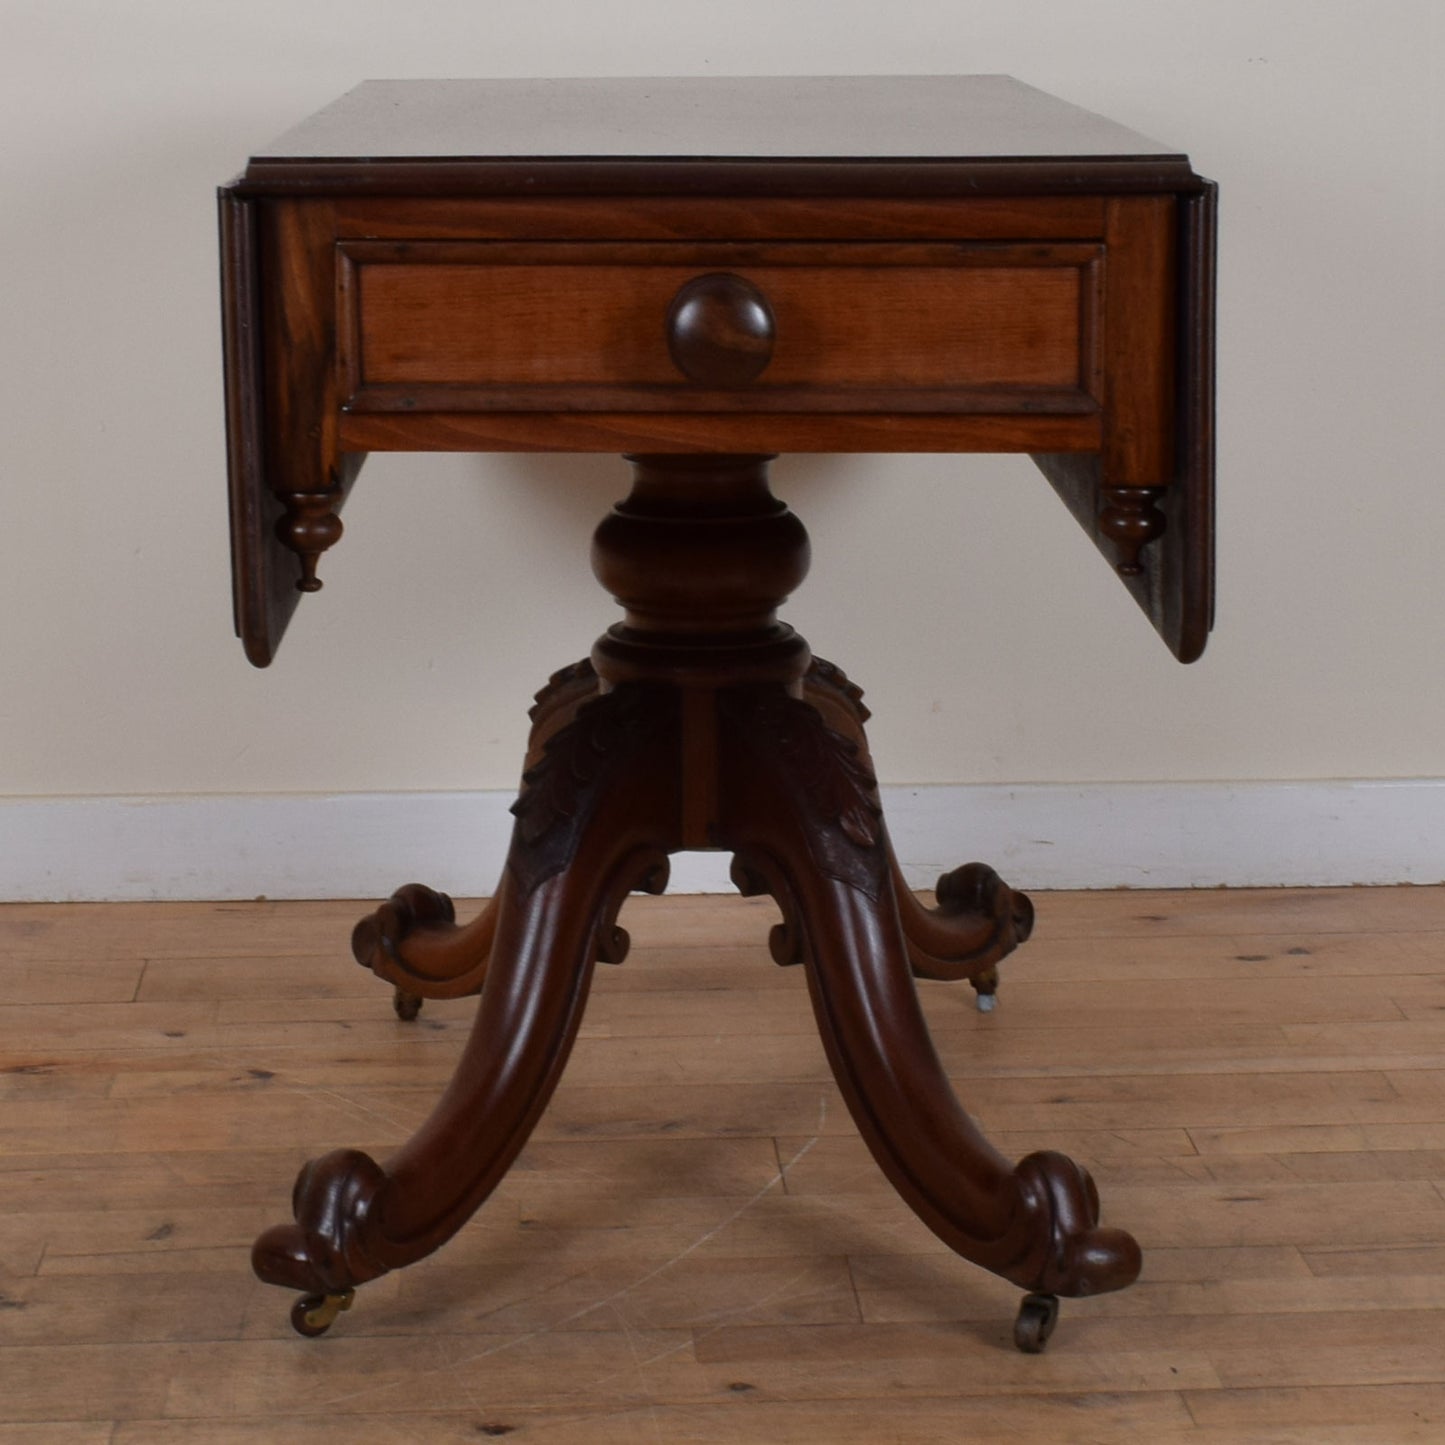 Carved Mahogany Regency Style Drop-Leaf Table and Two